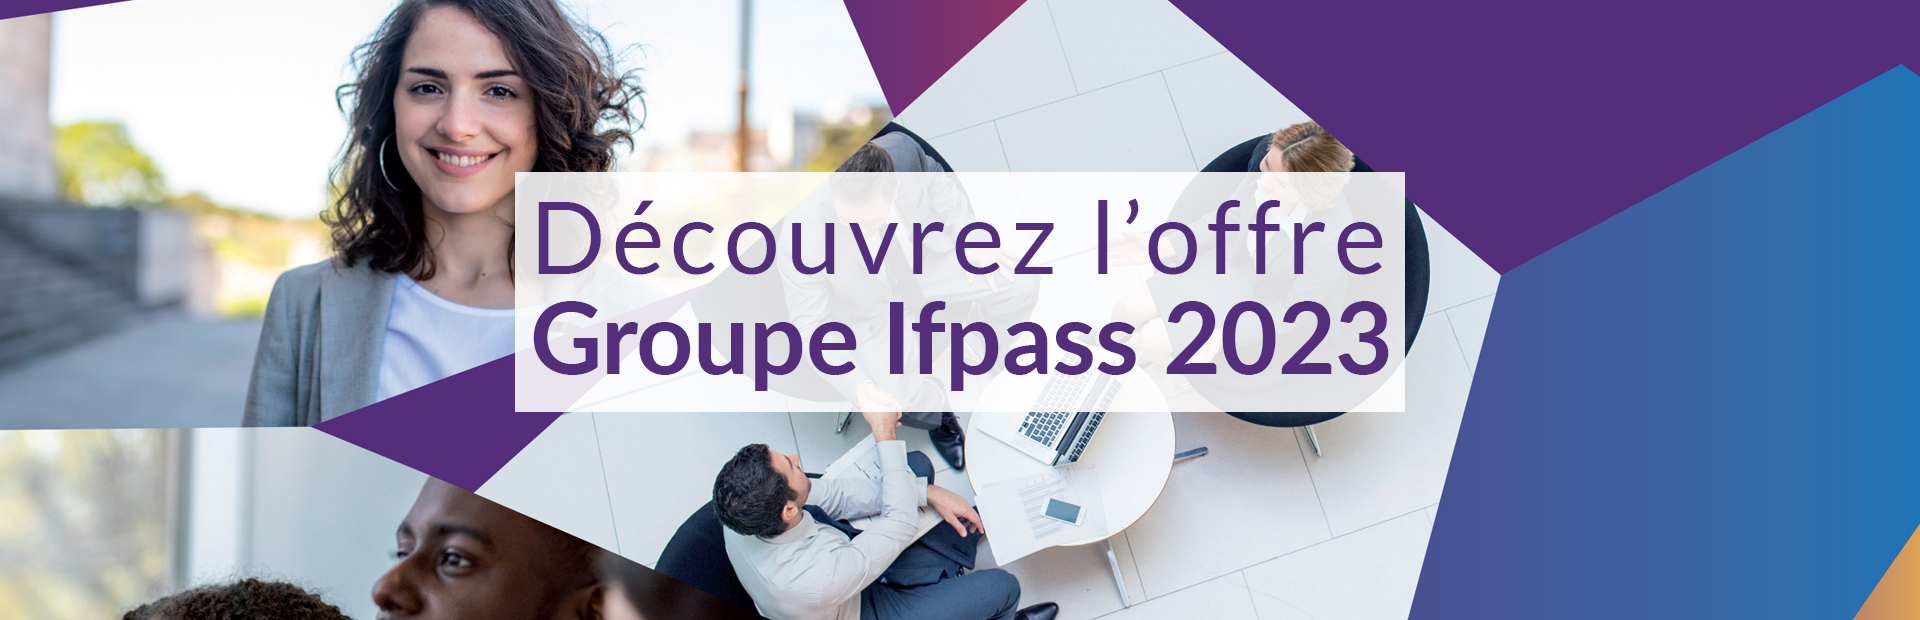 Plaquette 2023 Groupe Ifpass